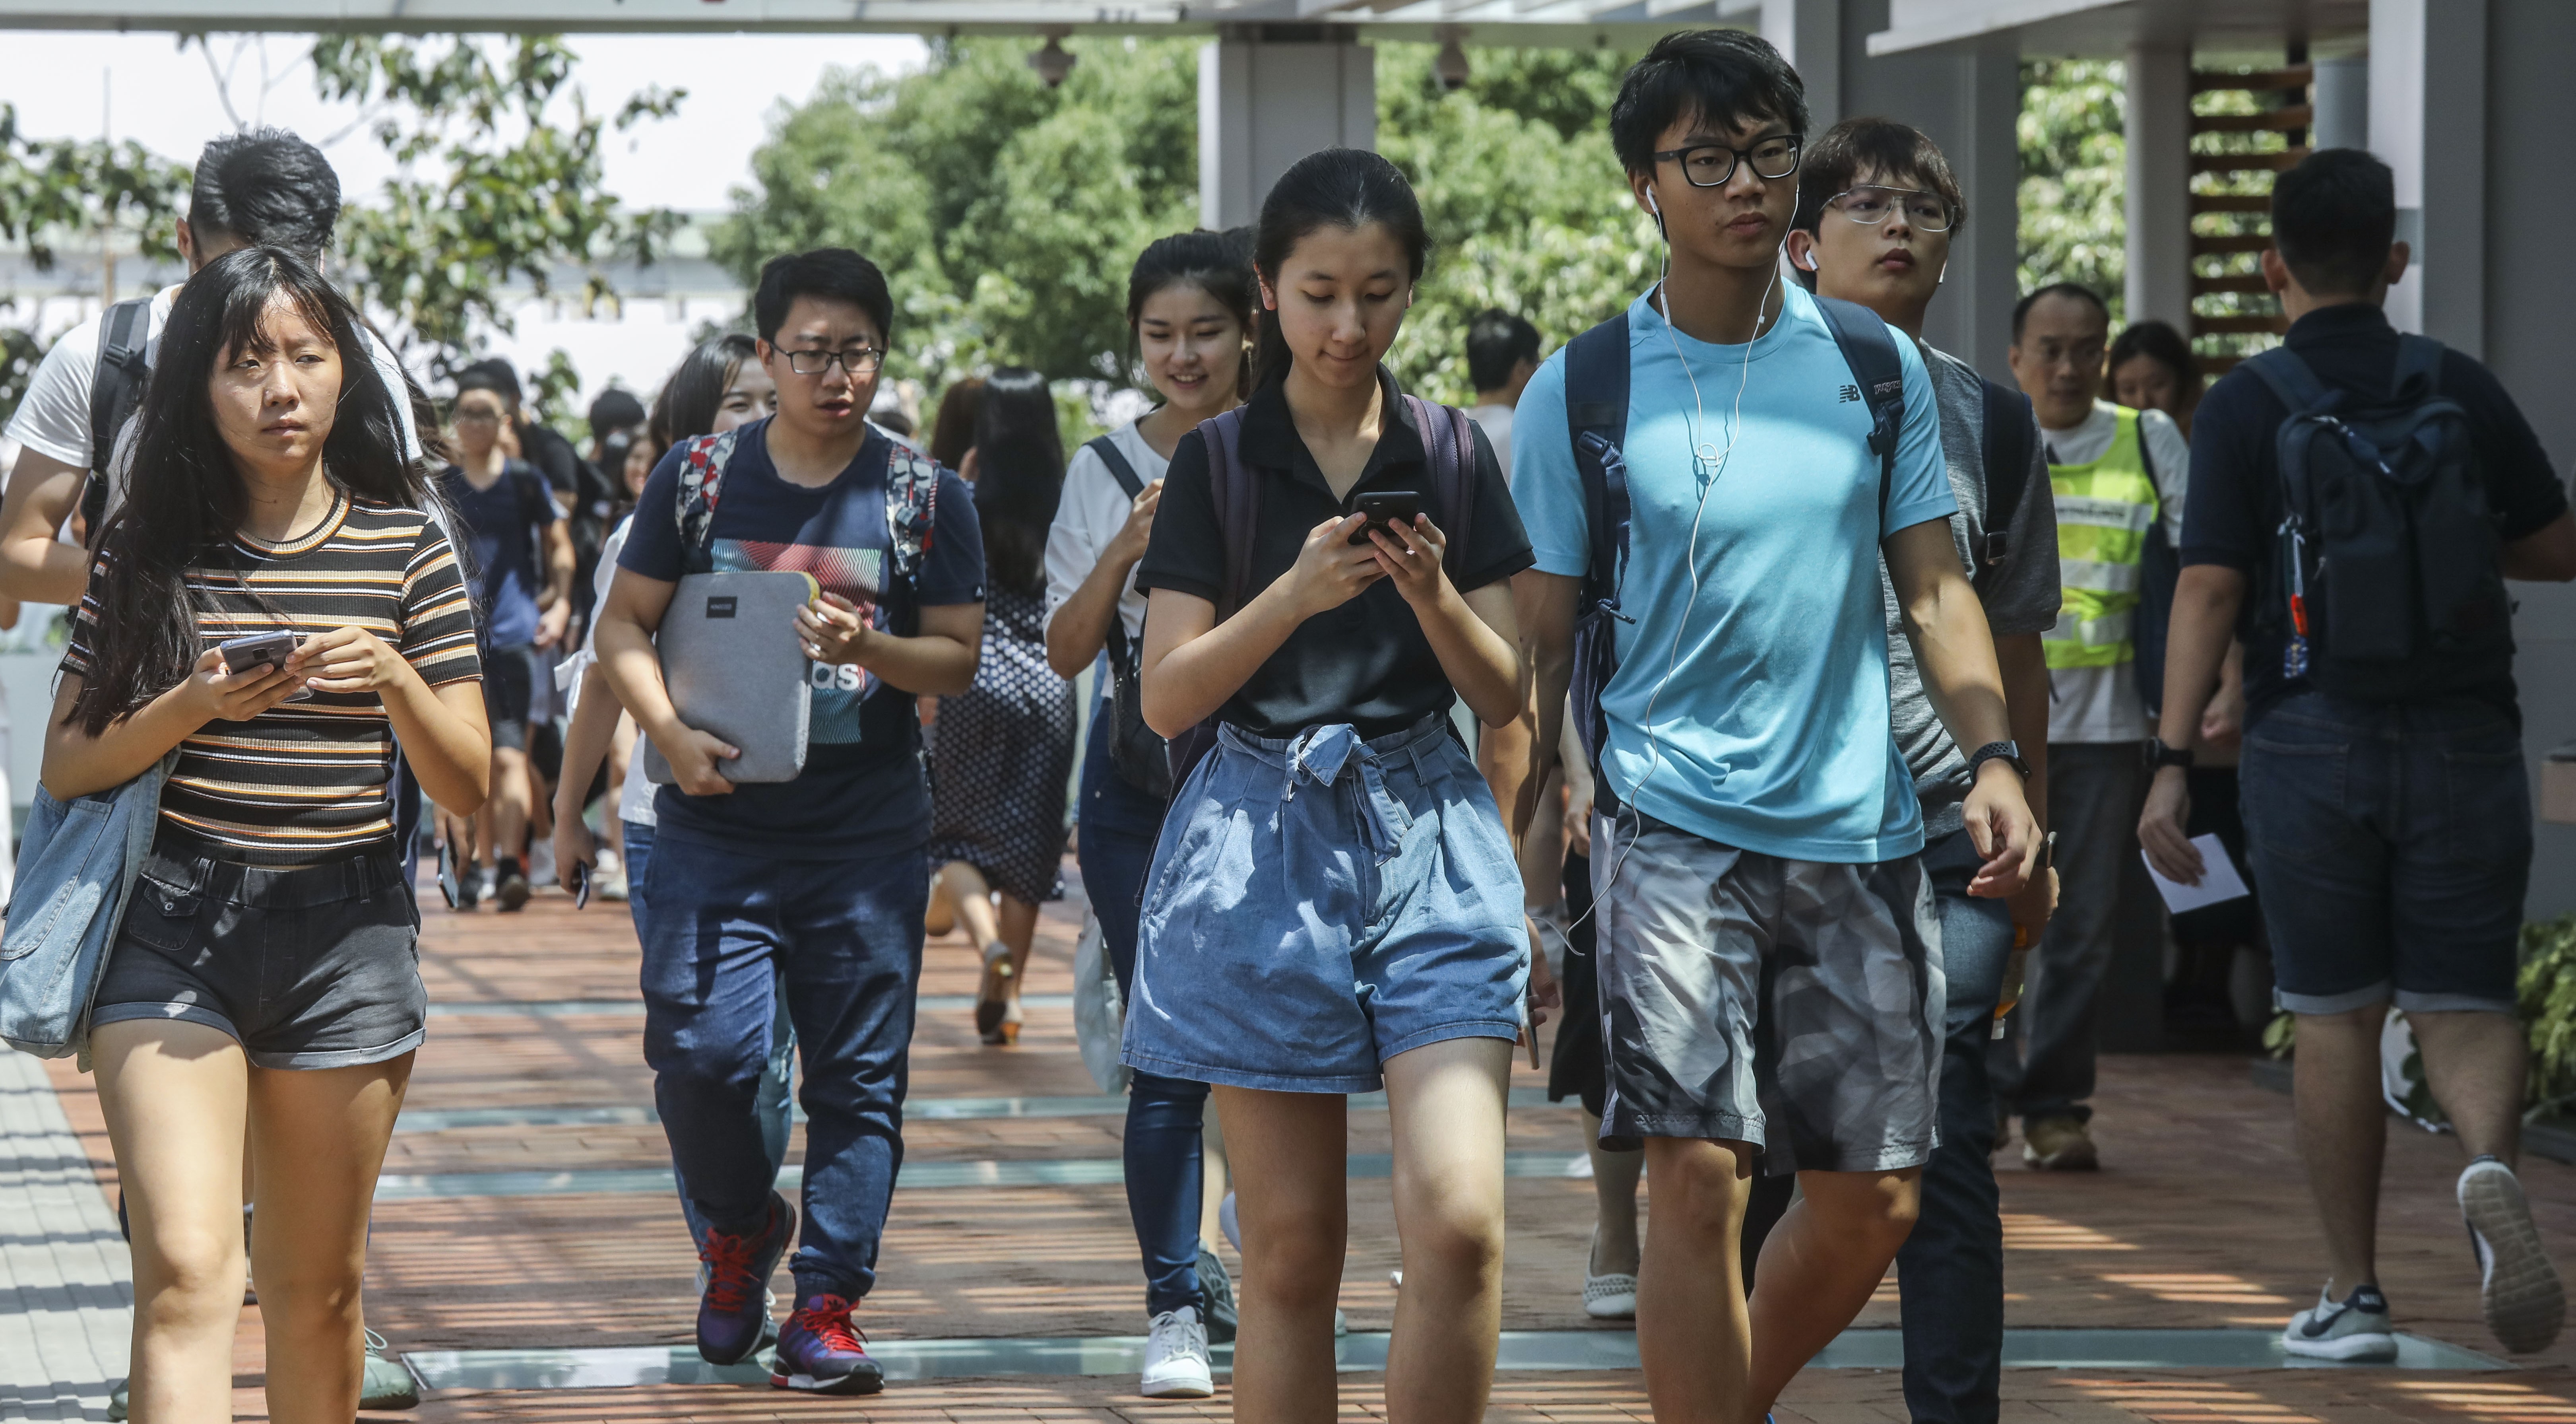 Undergraduates at the University of Hong Kong in Pok Fu Lam, seen on September 18. With an estimated one in two jobs set to be taken over by automation and artificial intelligence, universities need to change the way they prepare undergraduates for employment. Photo: K.Y. Cheng